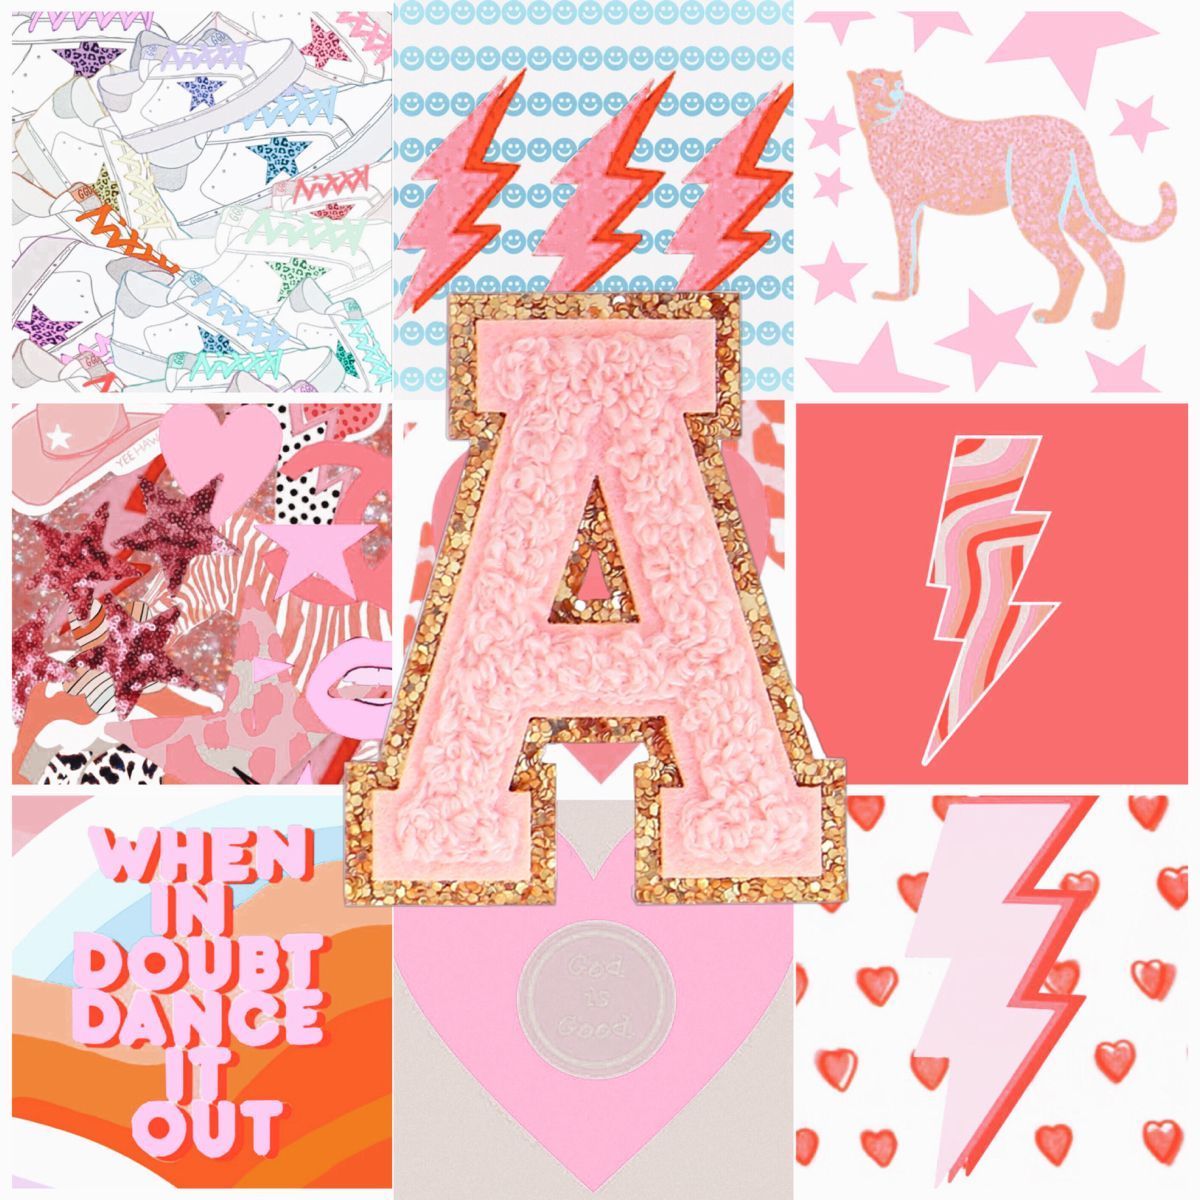 A collage of different pictures with the letter 'a' in them - Preppy